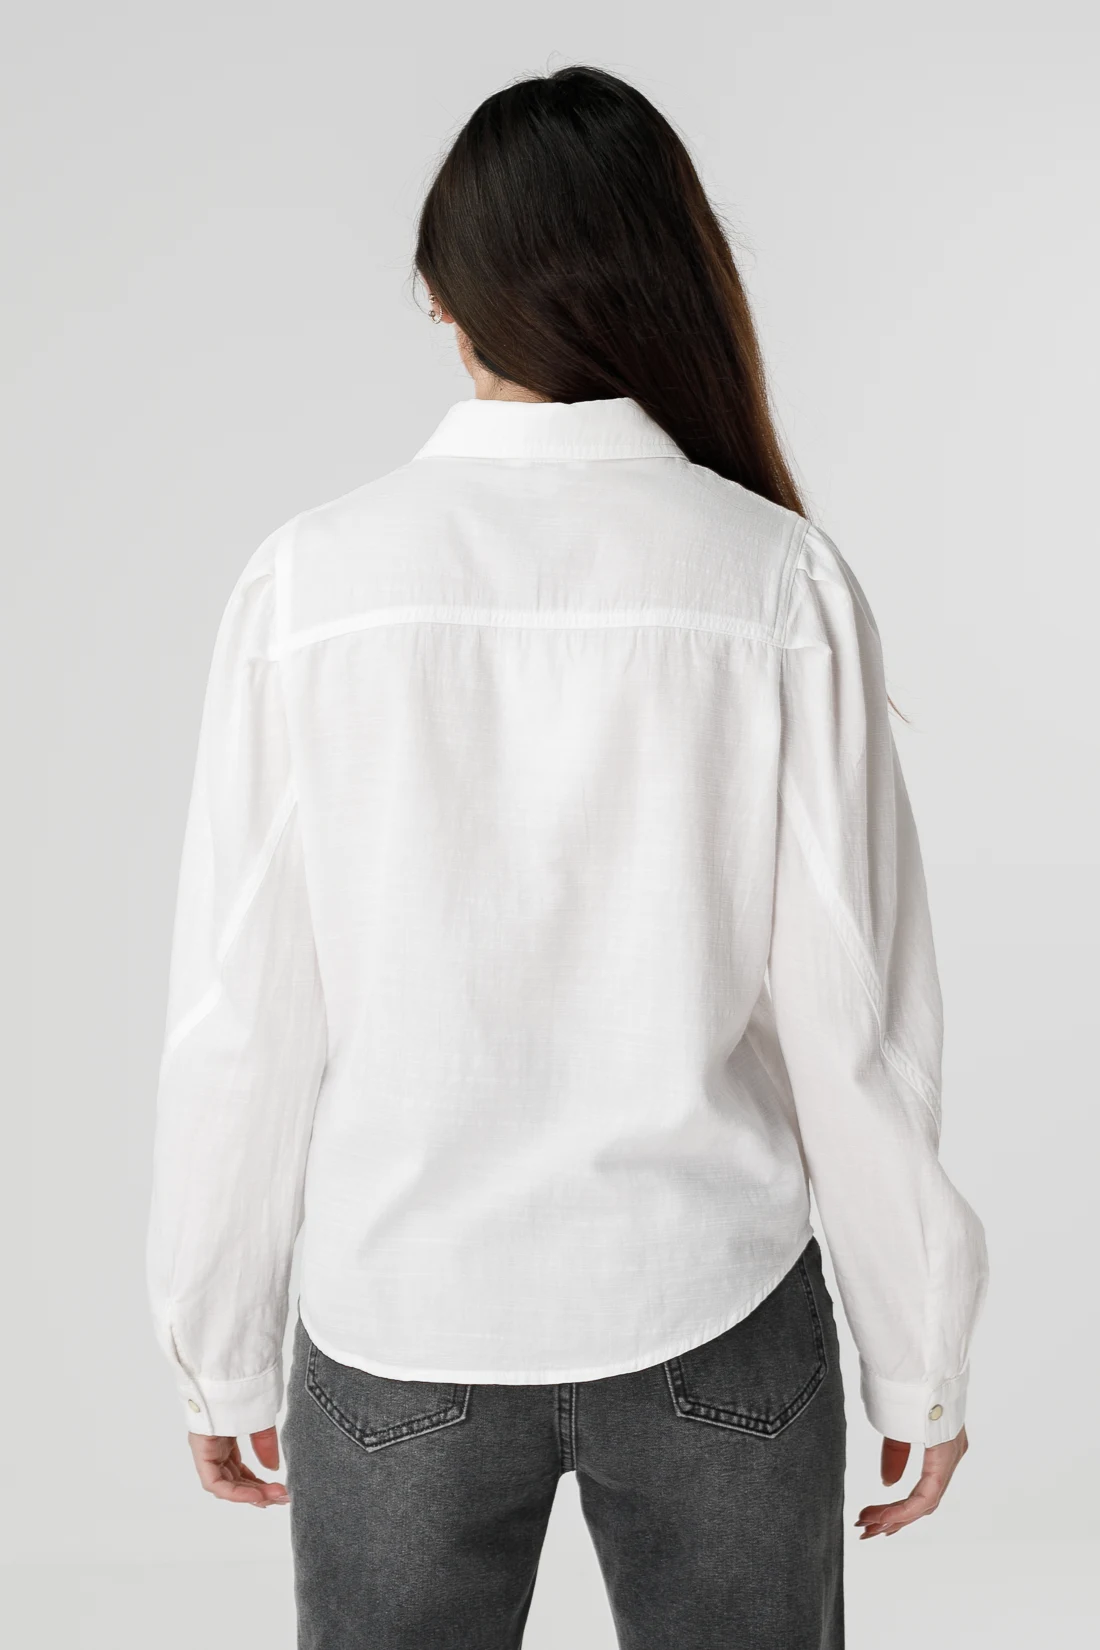 CHEMISE BUSWEL - BLANCHE